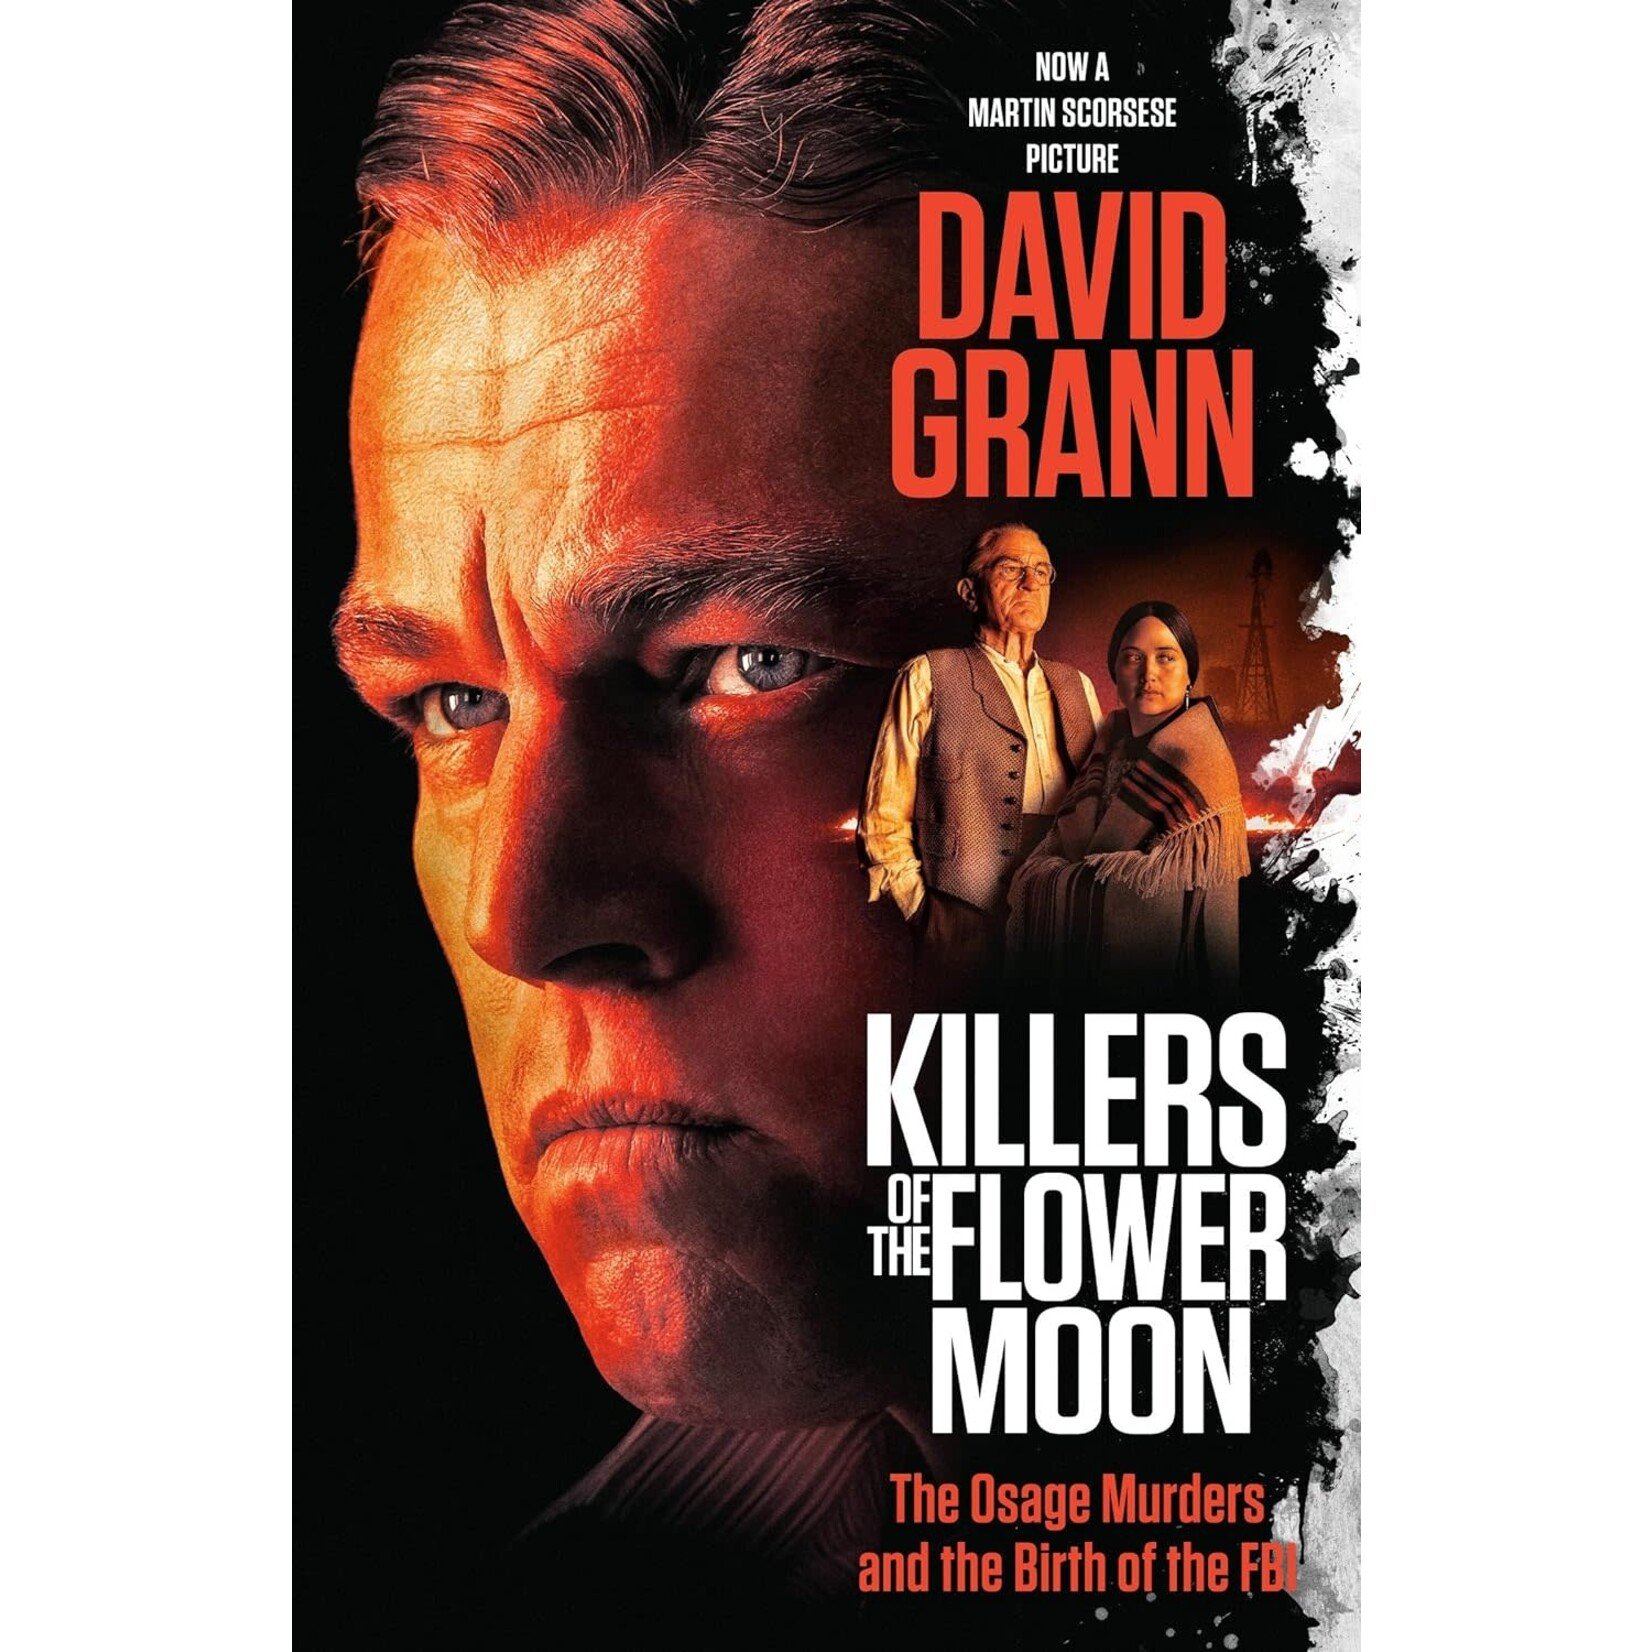 Killers of the Flower Moon: The Osage Murders and the Birth of the FBI (Movie Tie-in Edition)